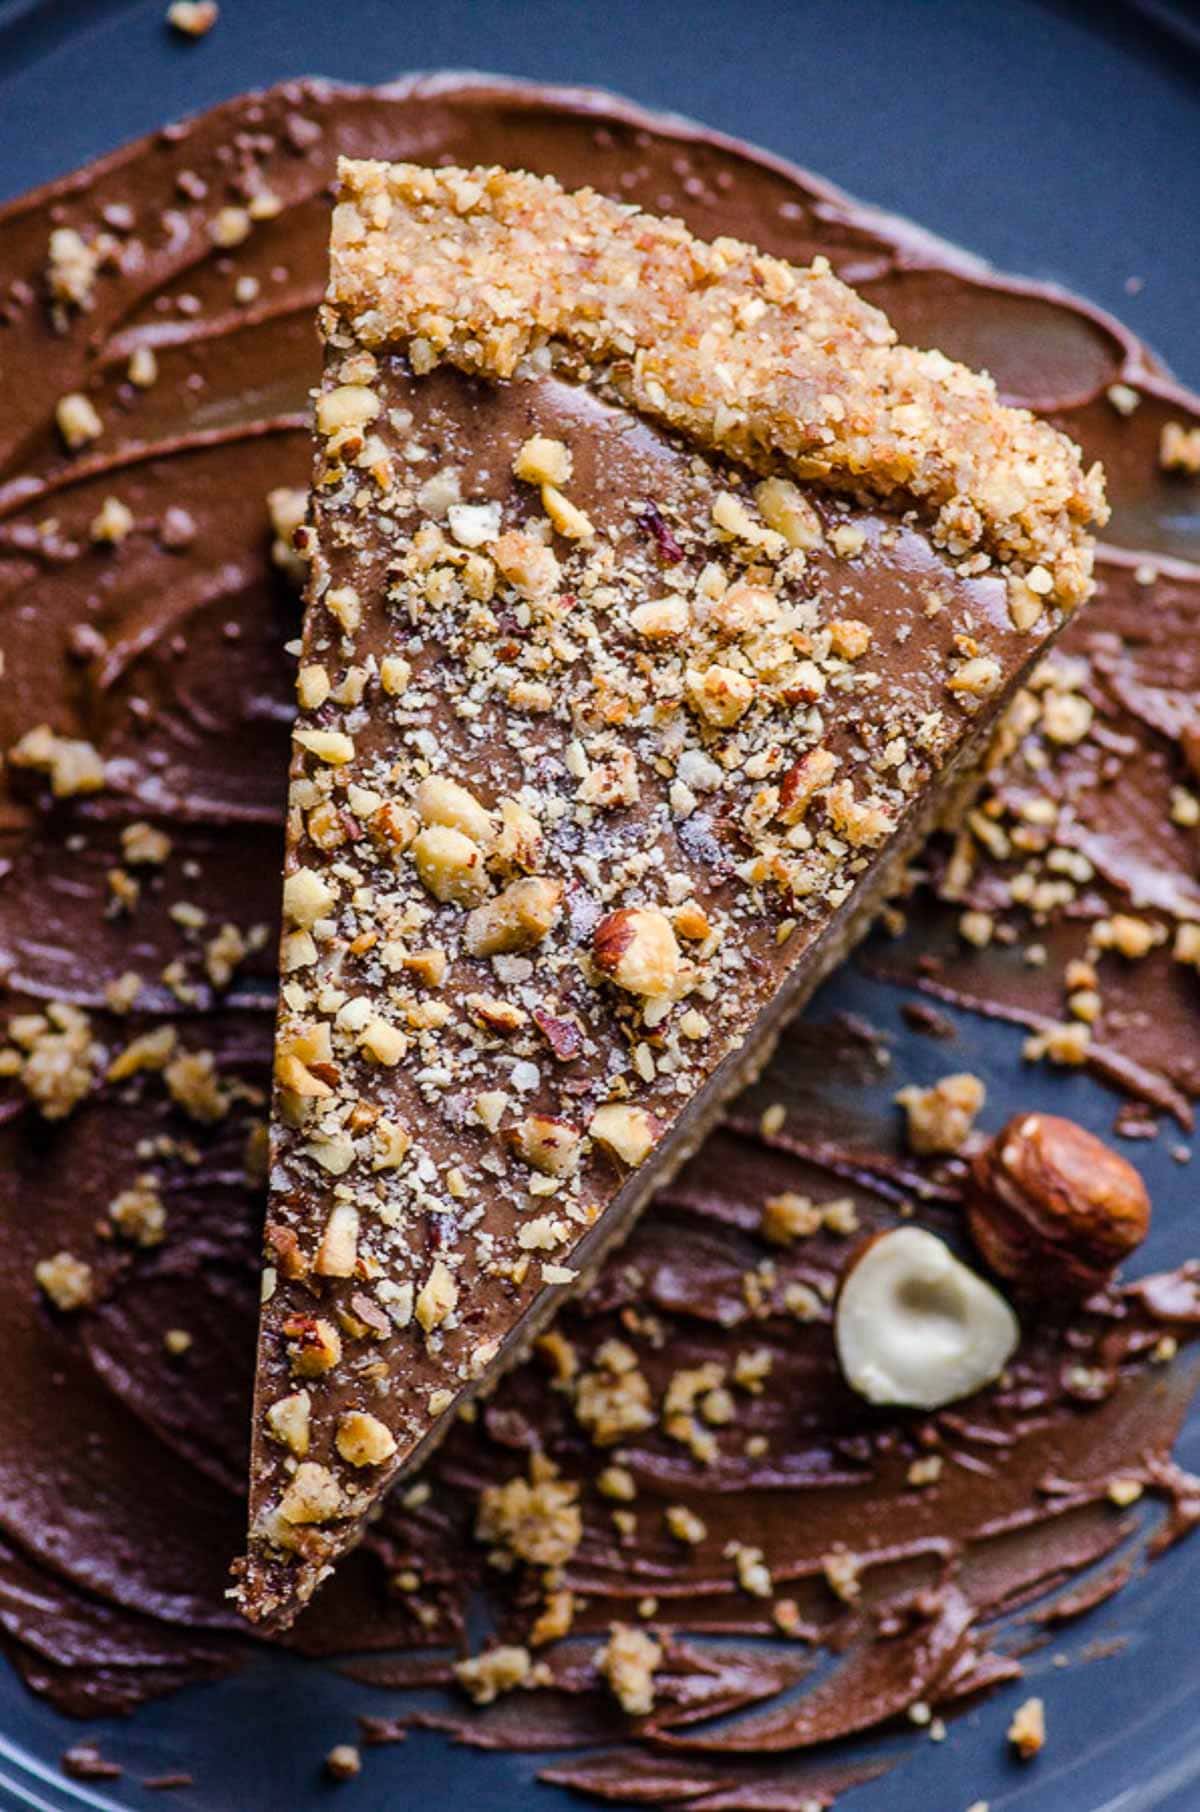 A slice of healthy nutella pie with hazelnut and chocolate garnish.